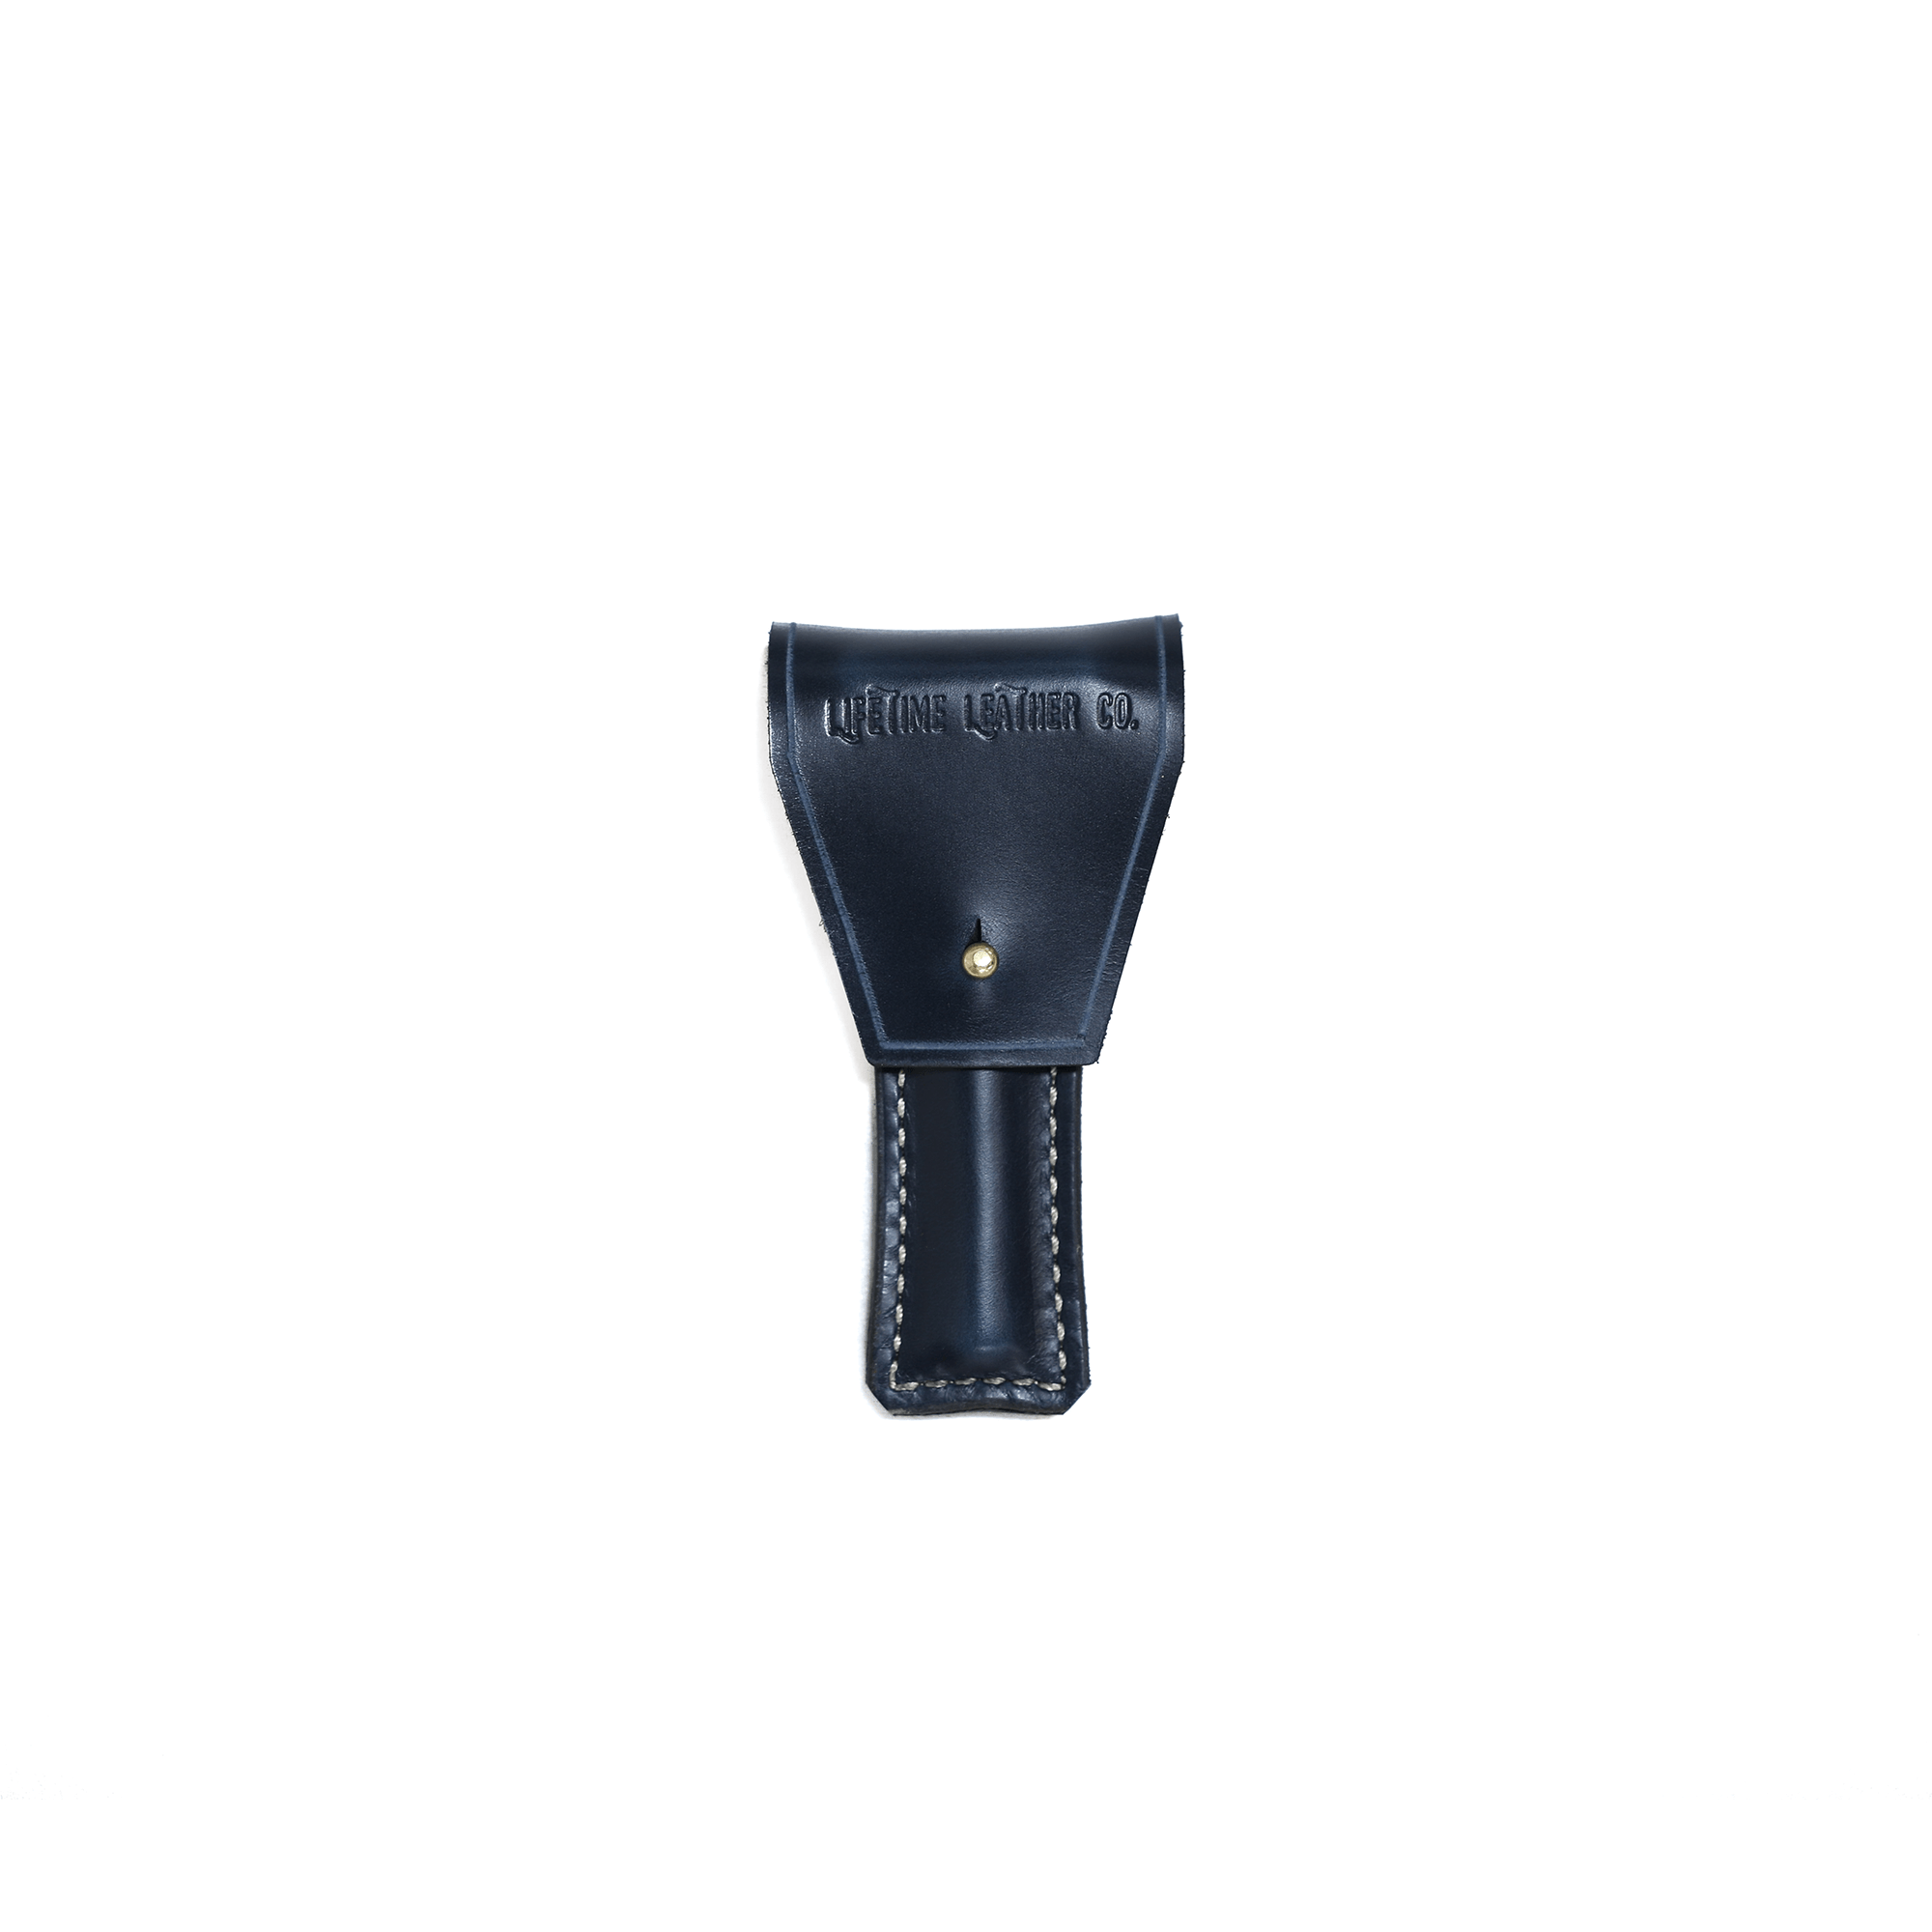 Safety Razor Holder by Lifetime Leather Co